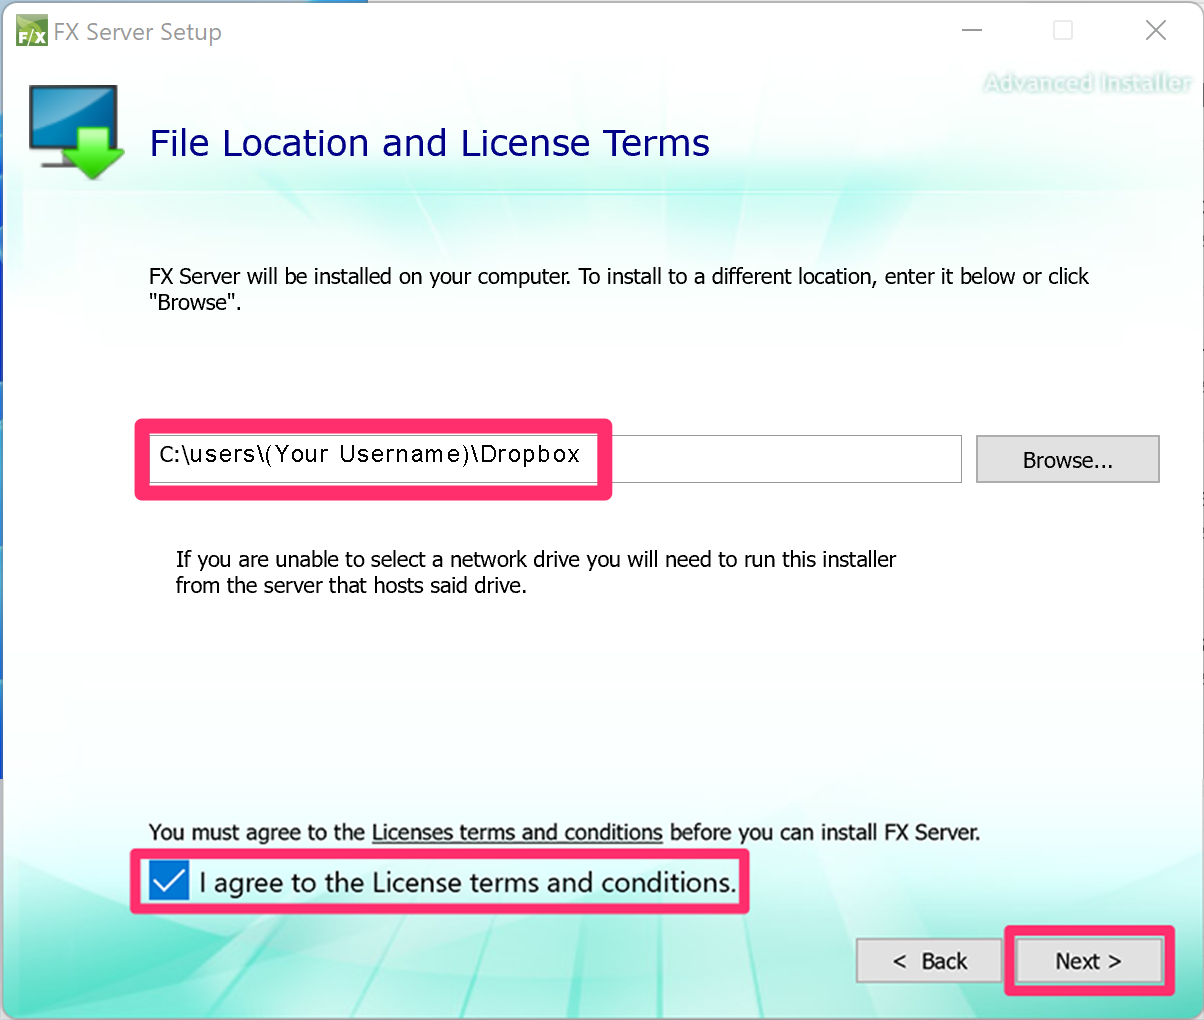 File Location and License Terms screen, shared online location shown